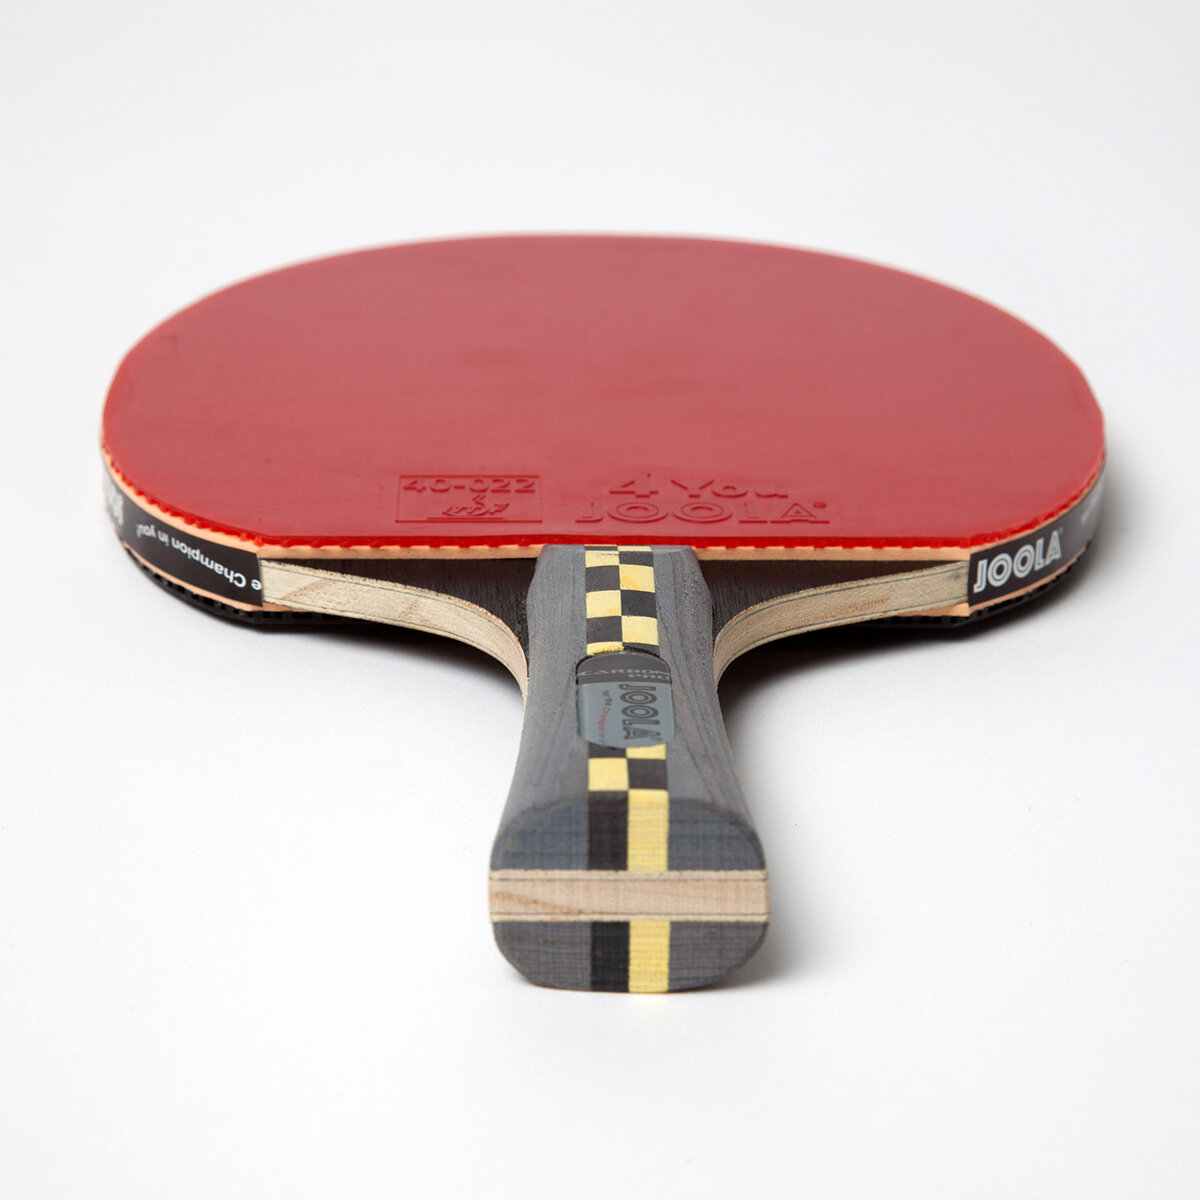 JOOLA Carbon Pro Table Tennis Racket - Ping Pong Paddle with